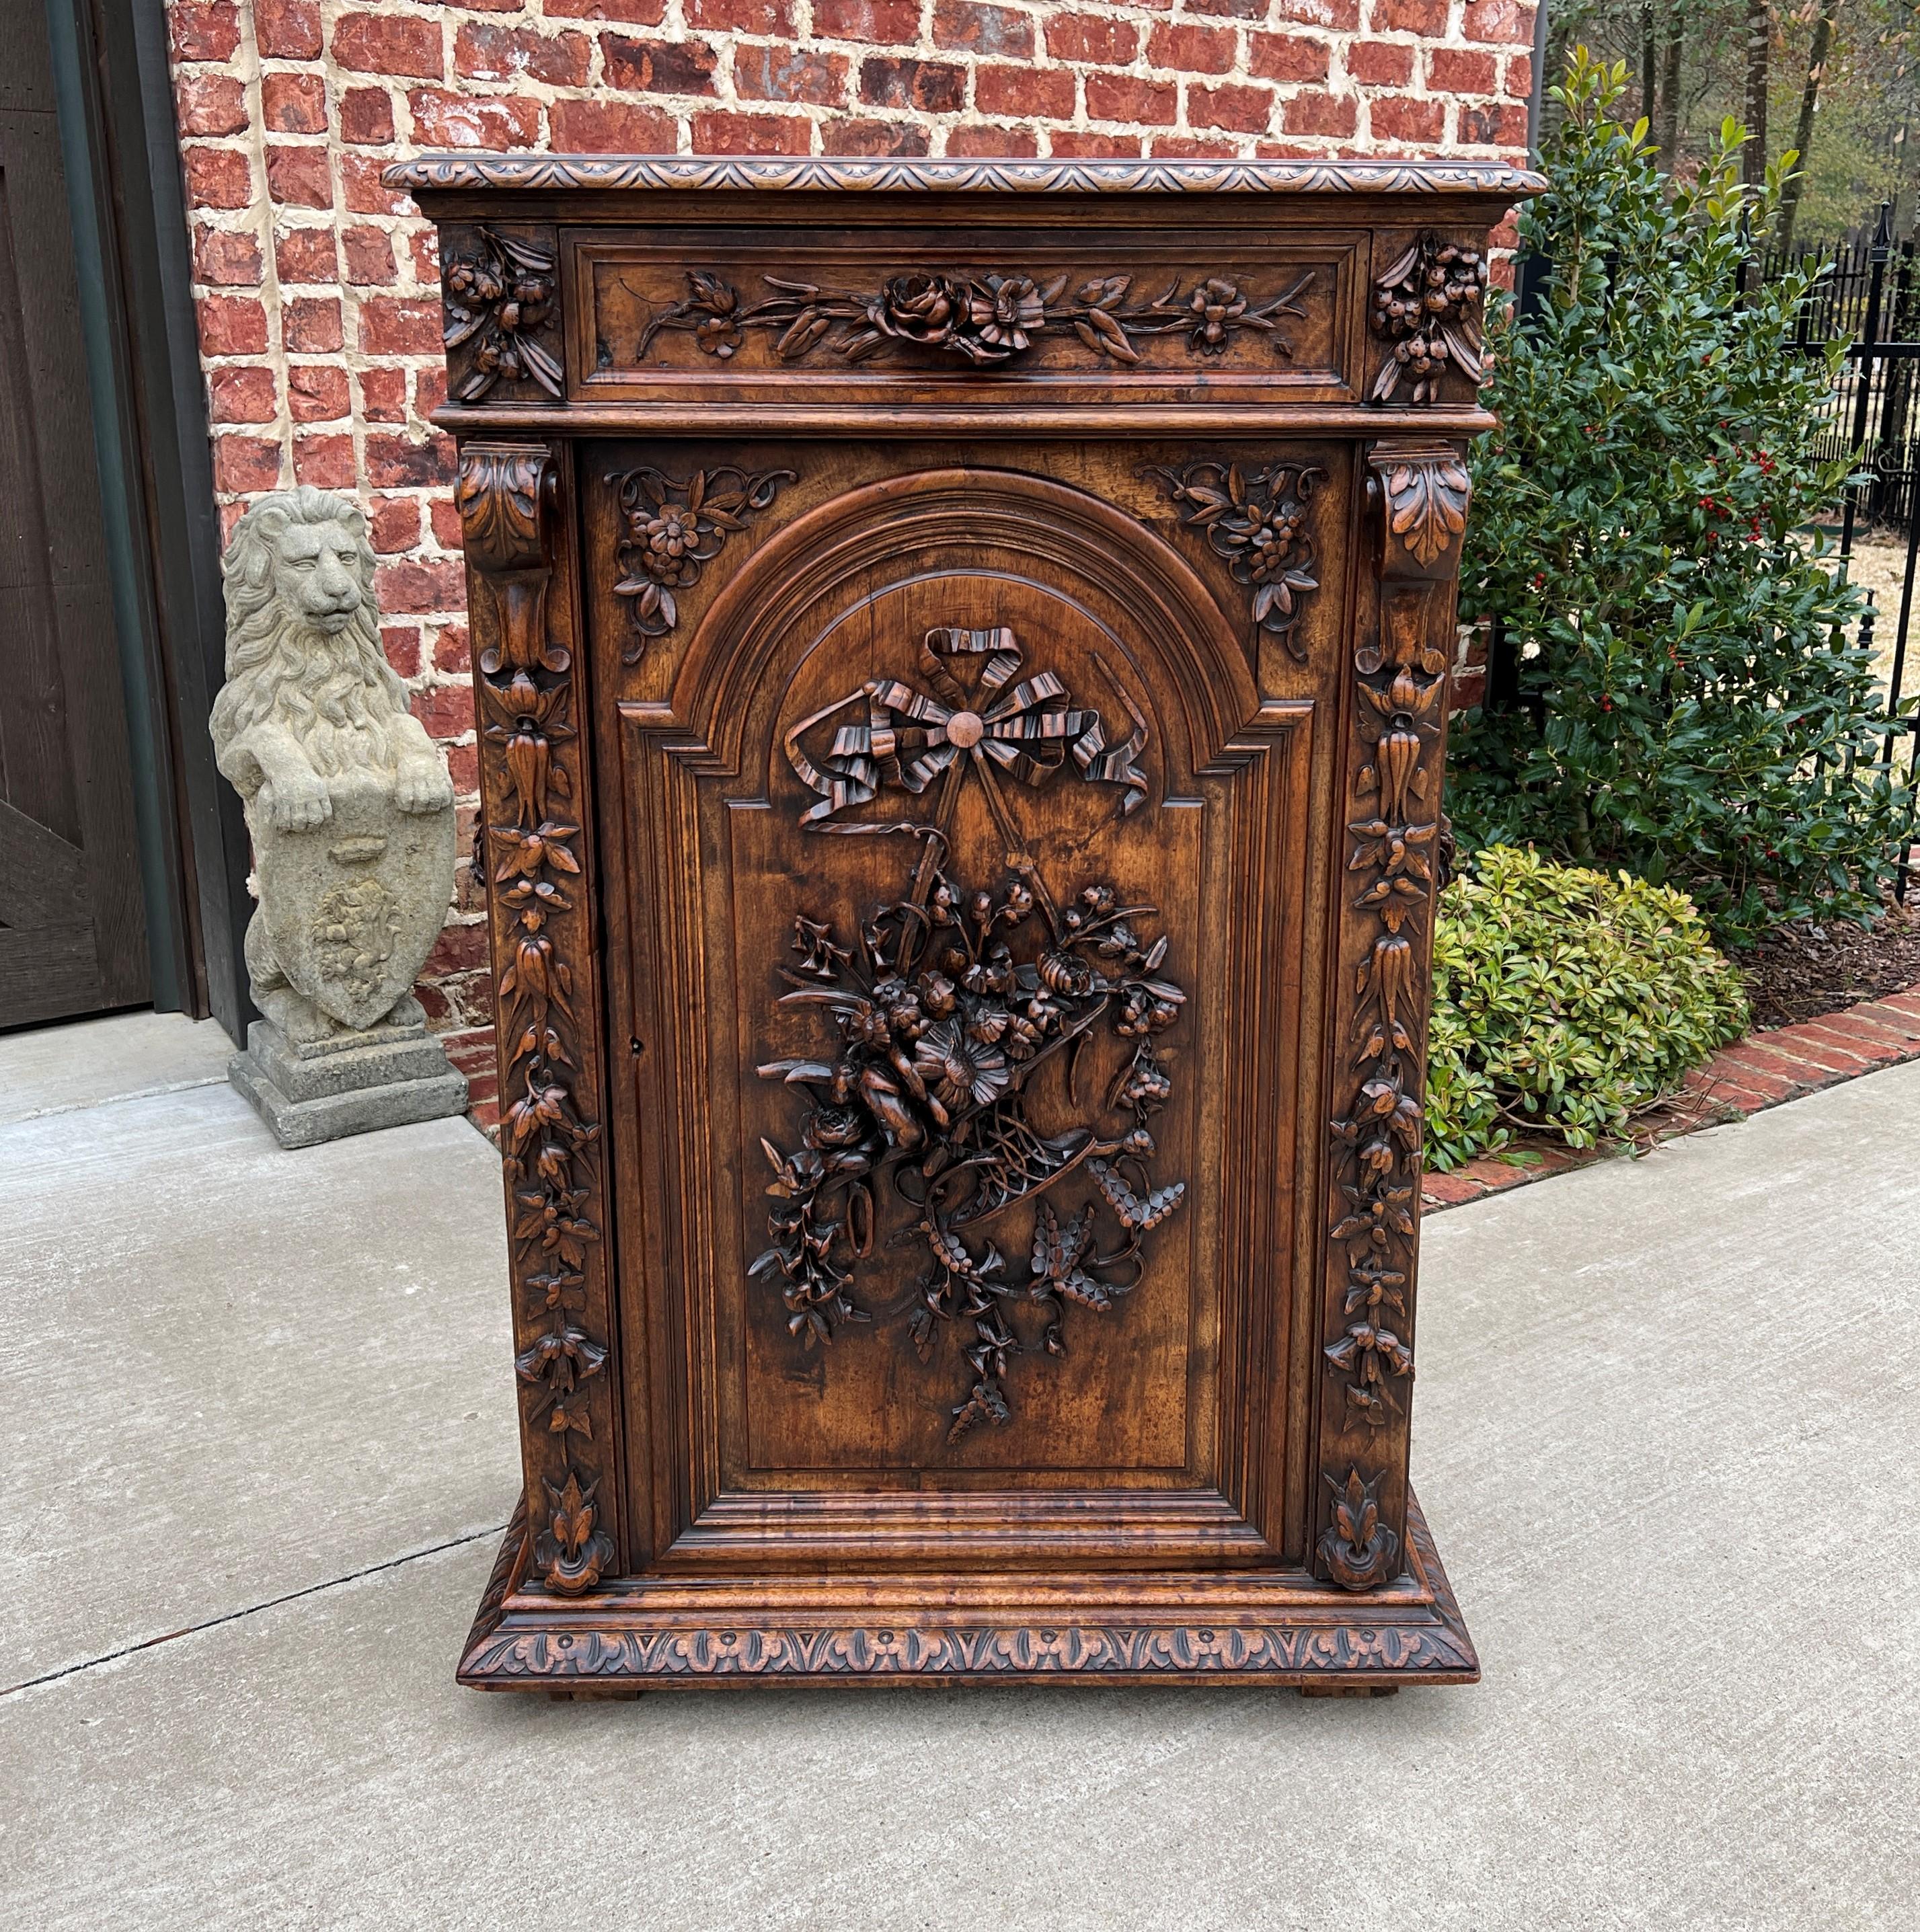 Elegant highly carved antique French oak renaissance revival jam cabinet with drawer~~c. 1880s.

Perfect statement piece that can accommodate any number of storage needs in today's home~~use in a bedroom or dressing area for clothing or